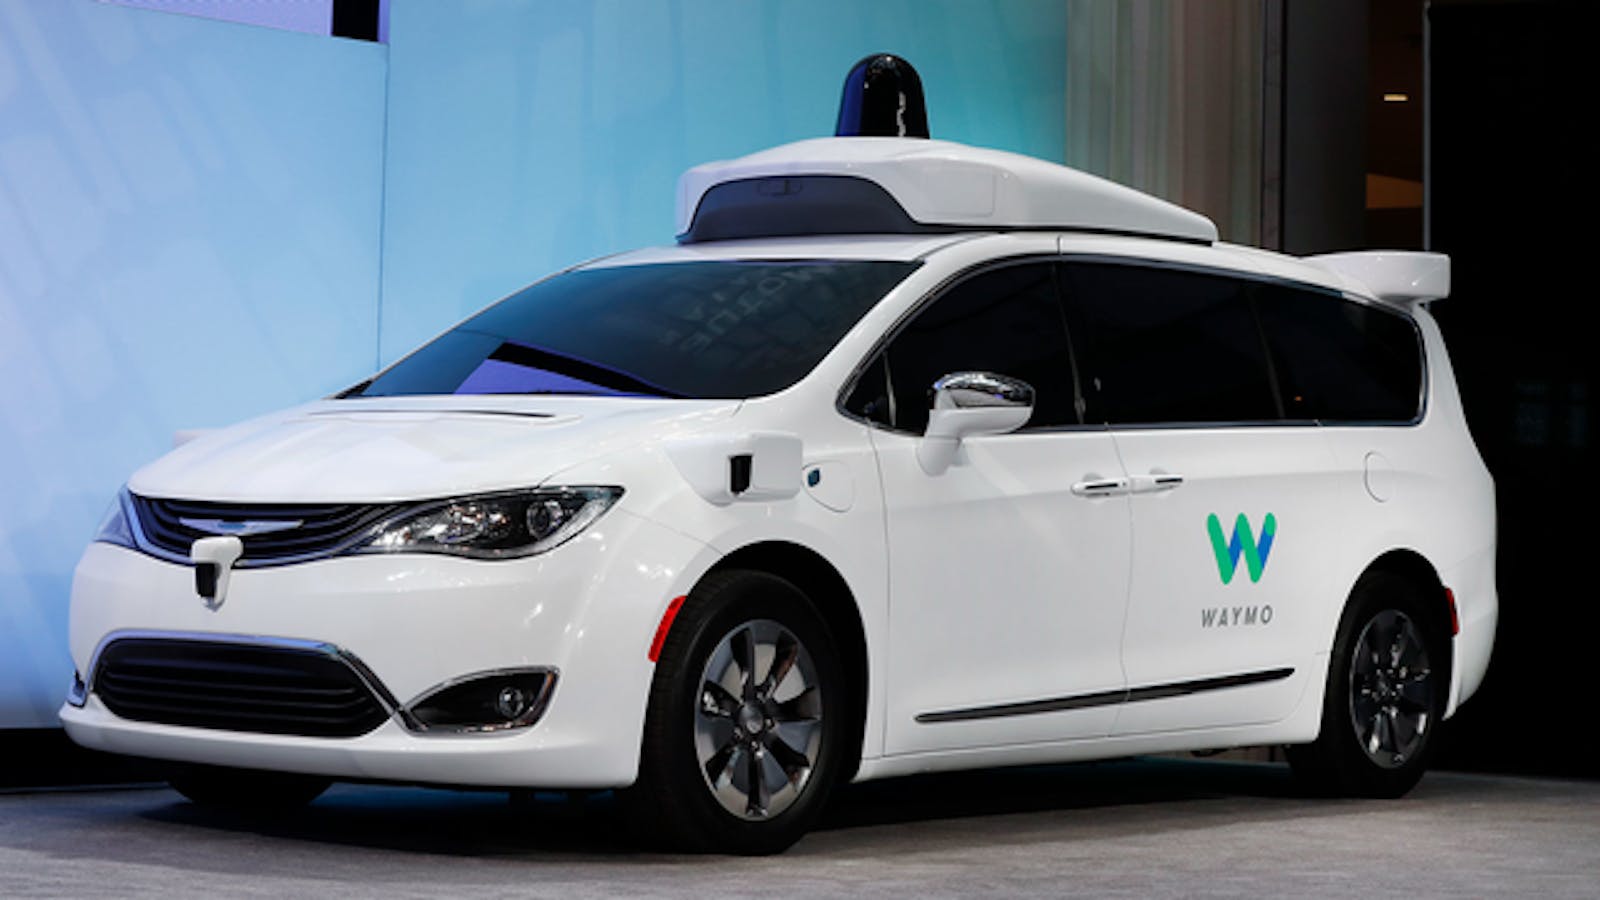 A Chrysler Pacifica hybrid outfitted with Waymo's self-driving technology, displayed at the North American International Auto Show in Detroit. Photo by AP